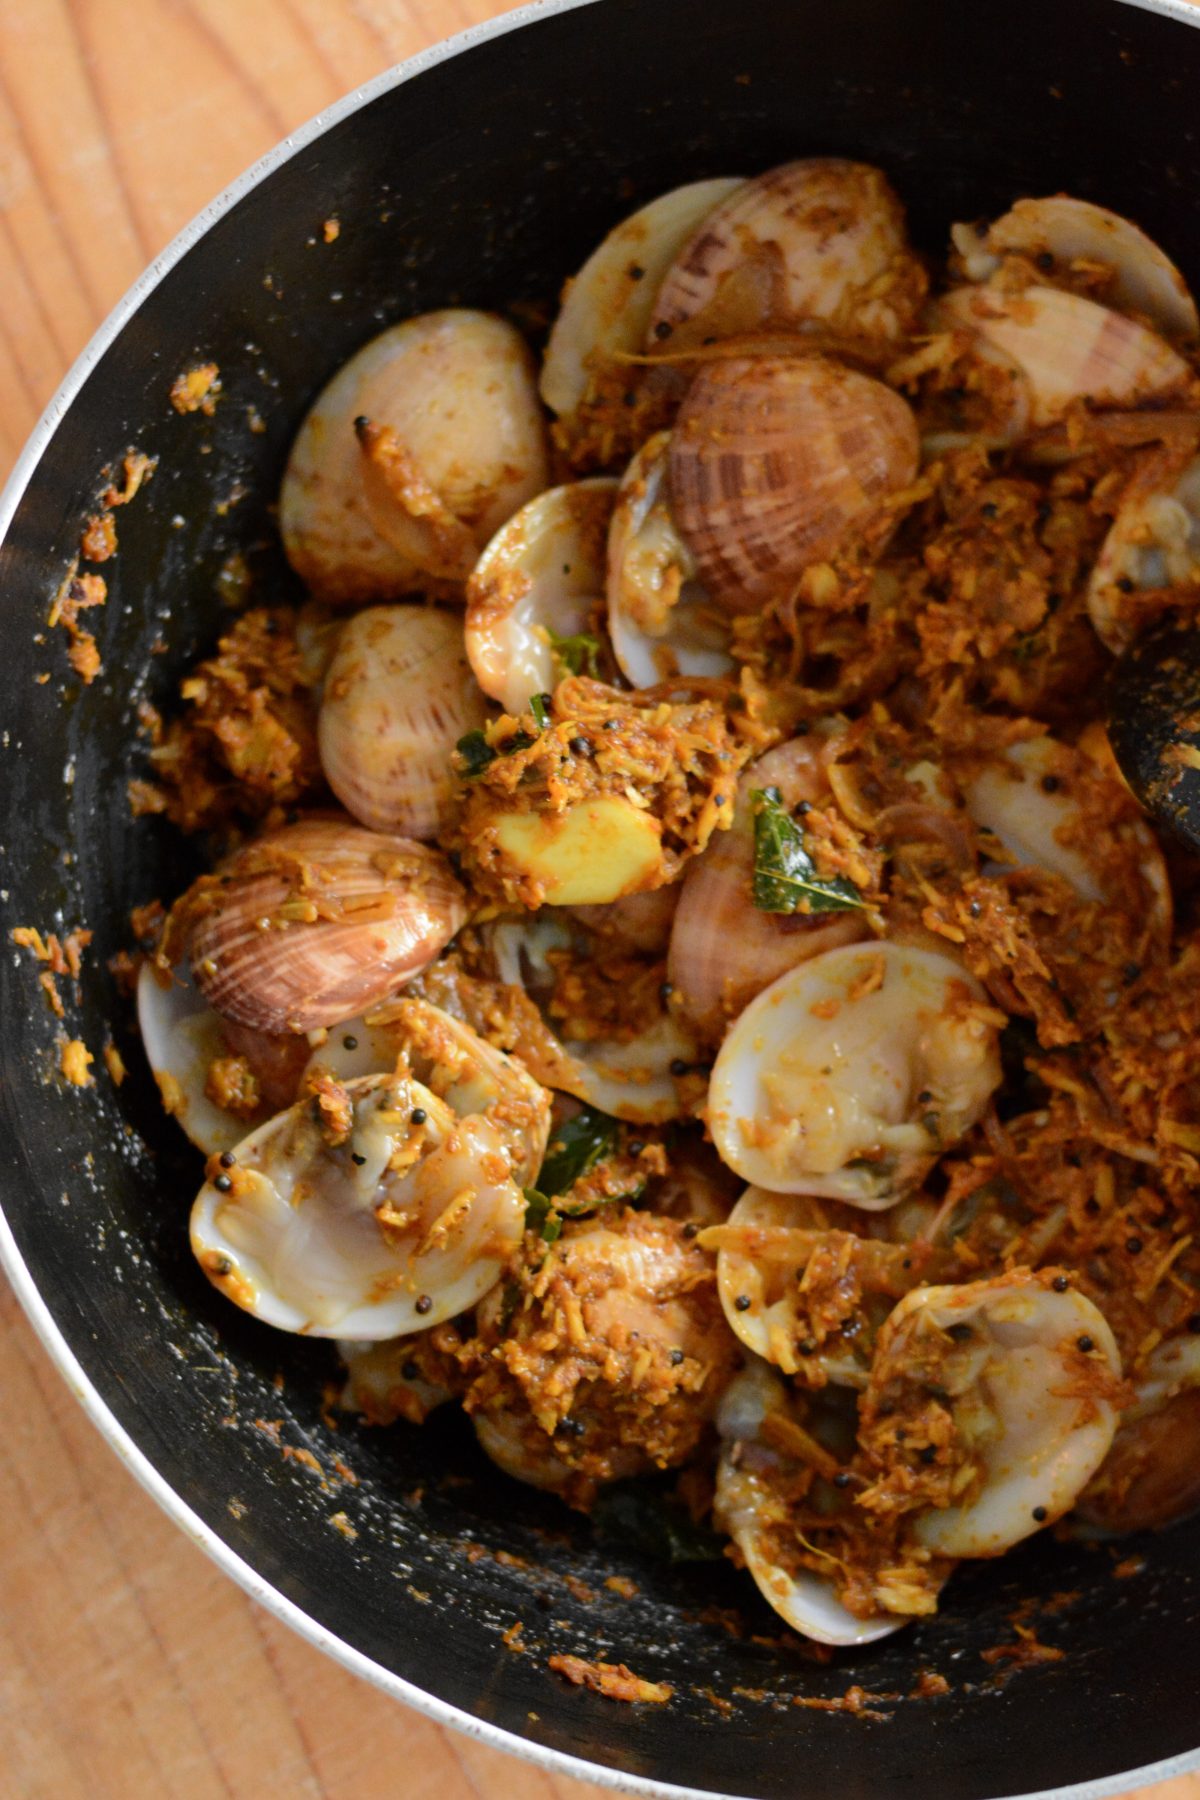 Kube Sukkhe (Mangalorean style Spicy Clams Sukka) - a traditional seafood preparation from the Protestant Christian community of Mangalore - thespiceadventuress.com